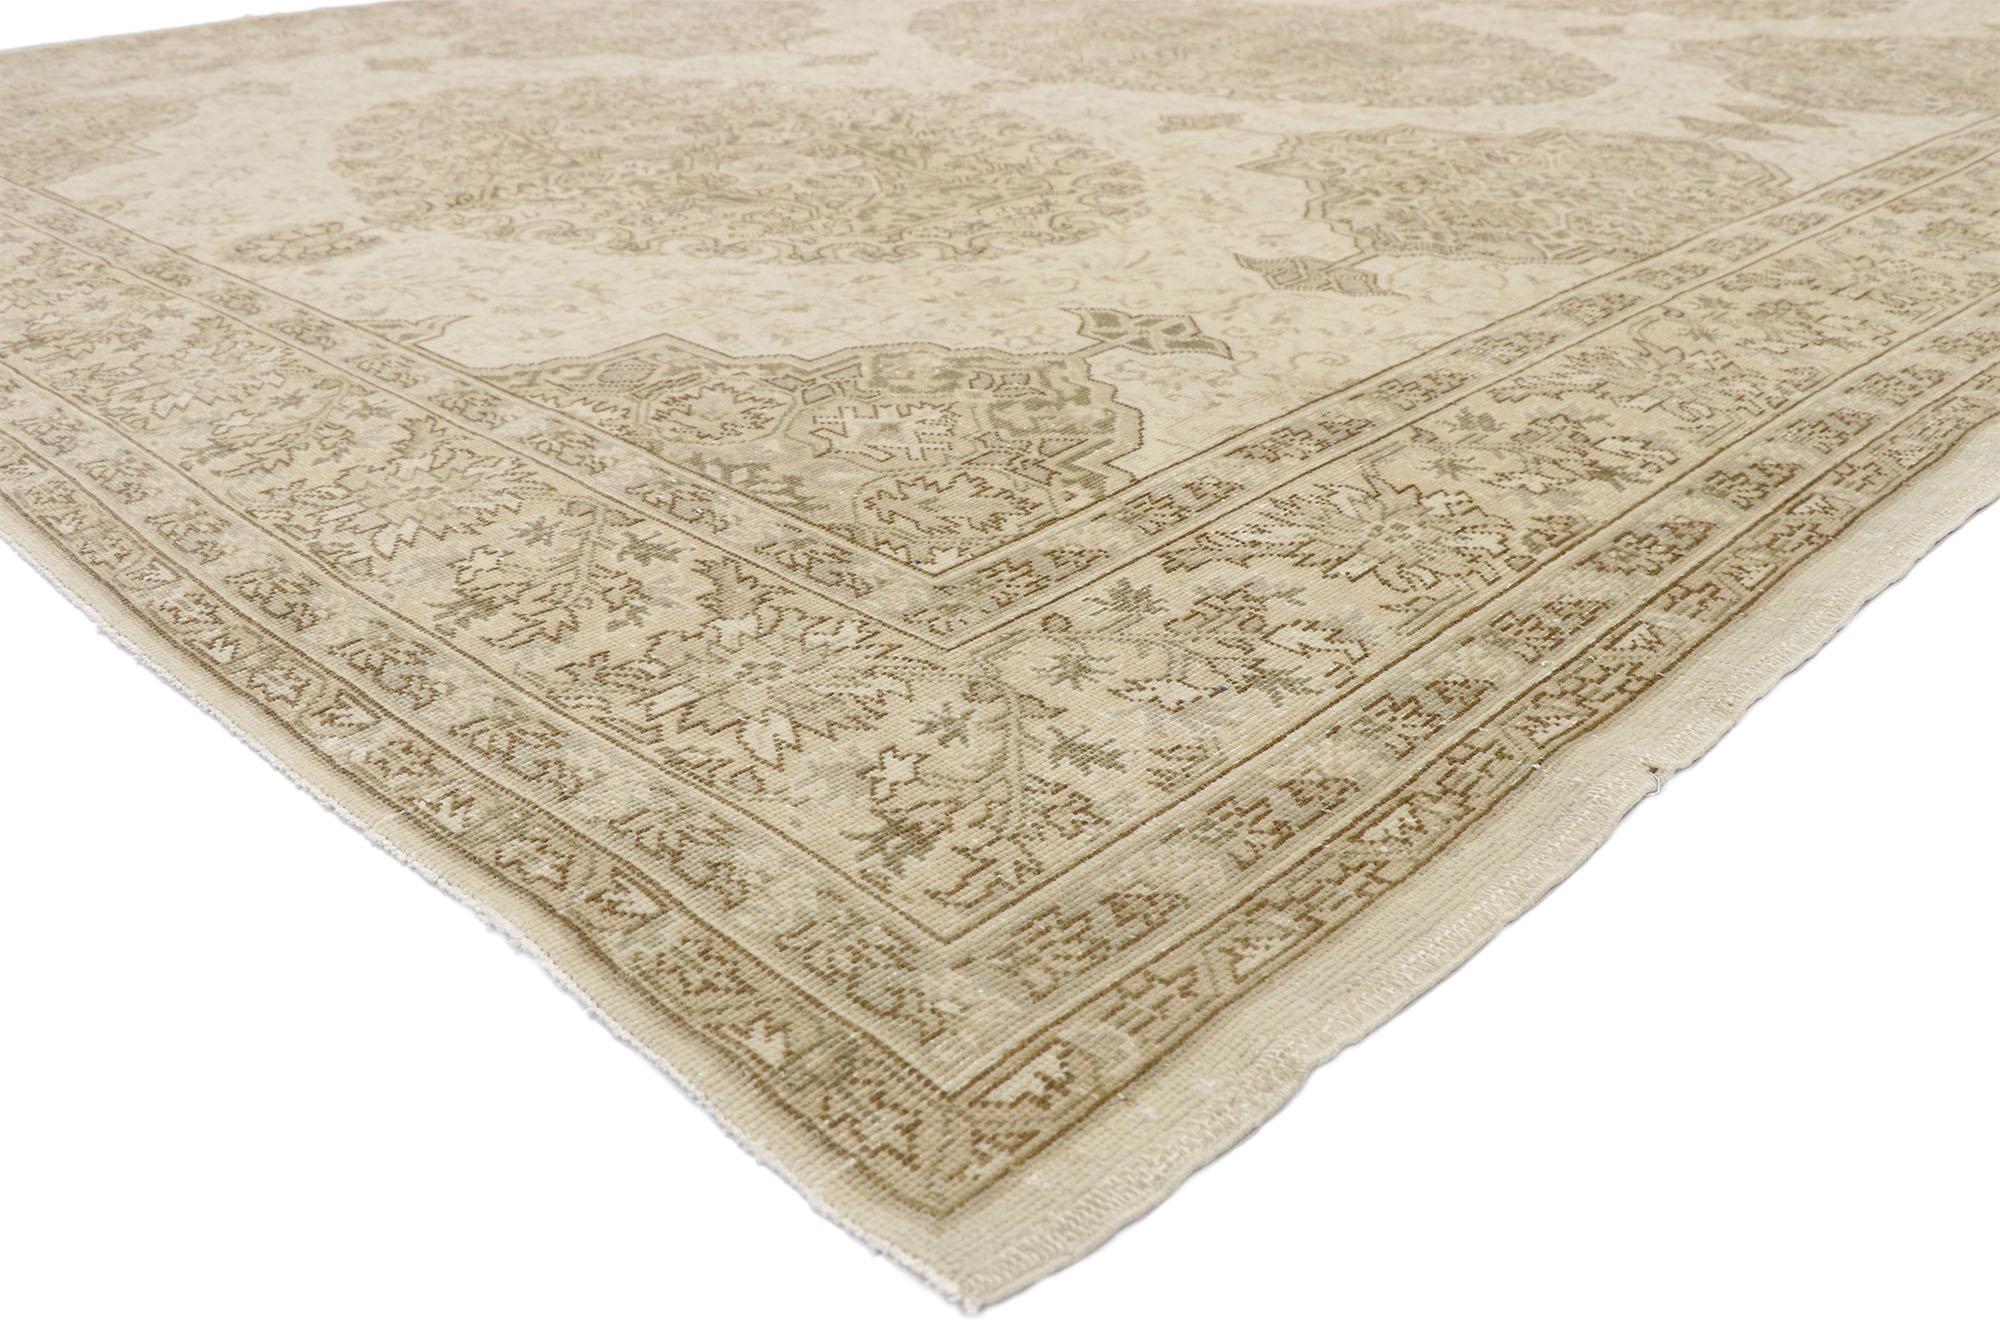 52652 Distressed Vintage Turkish Sivas Rug with Rustic William and Mary Style 09'00 x 12'04. With its neutral color palette, straight and curved lines, this hand knotted wool distressed vintage Turkish Sivas rug beautifully embodies William and Mary